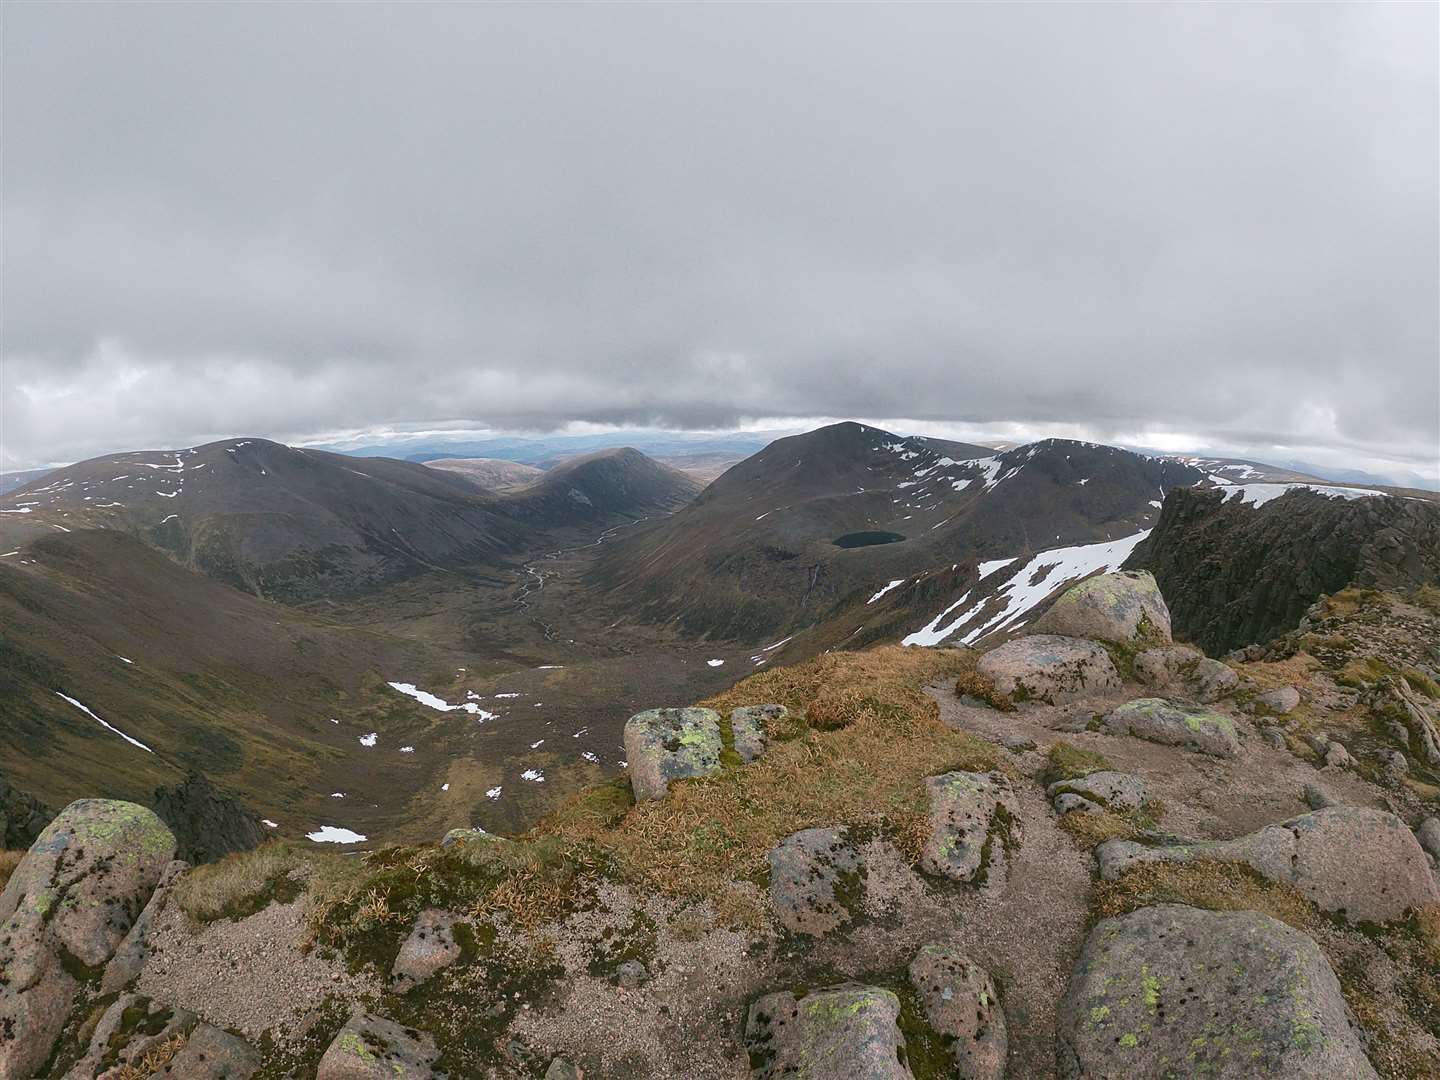 The view over the Lairig Ghru and Ben Macdui from Braeriach.